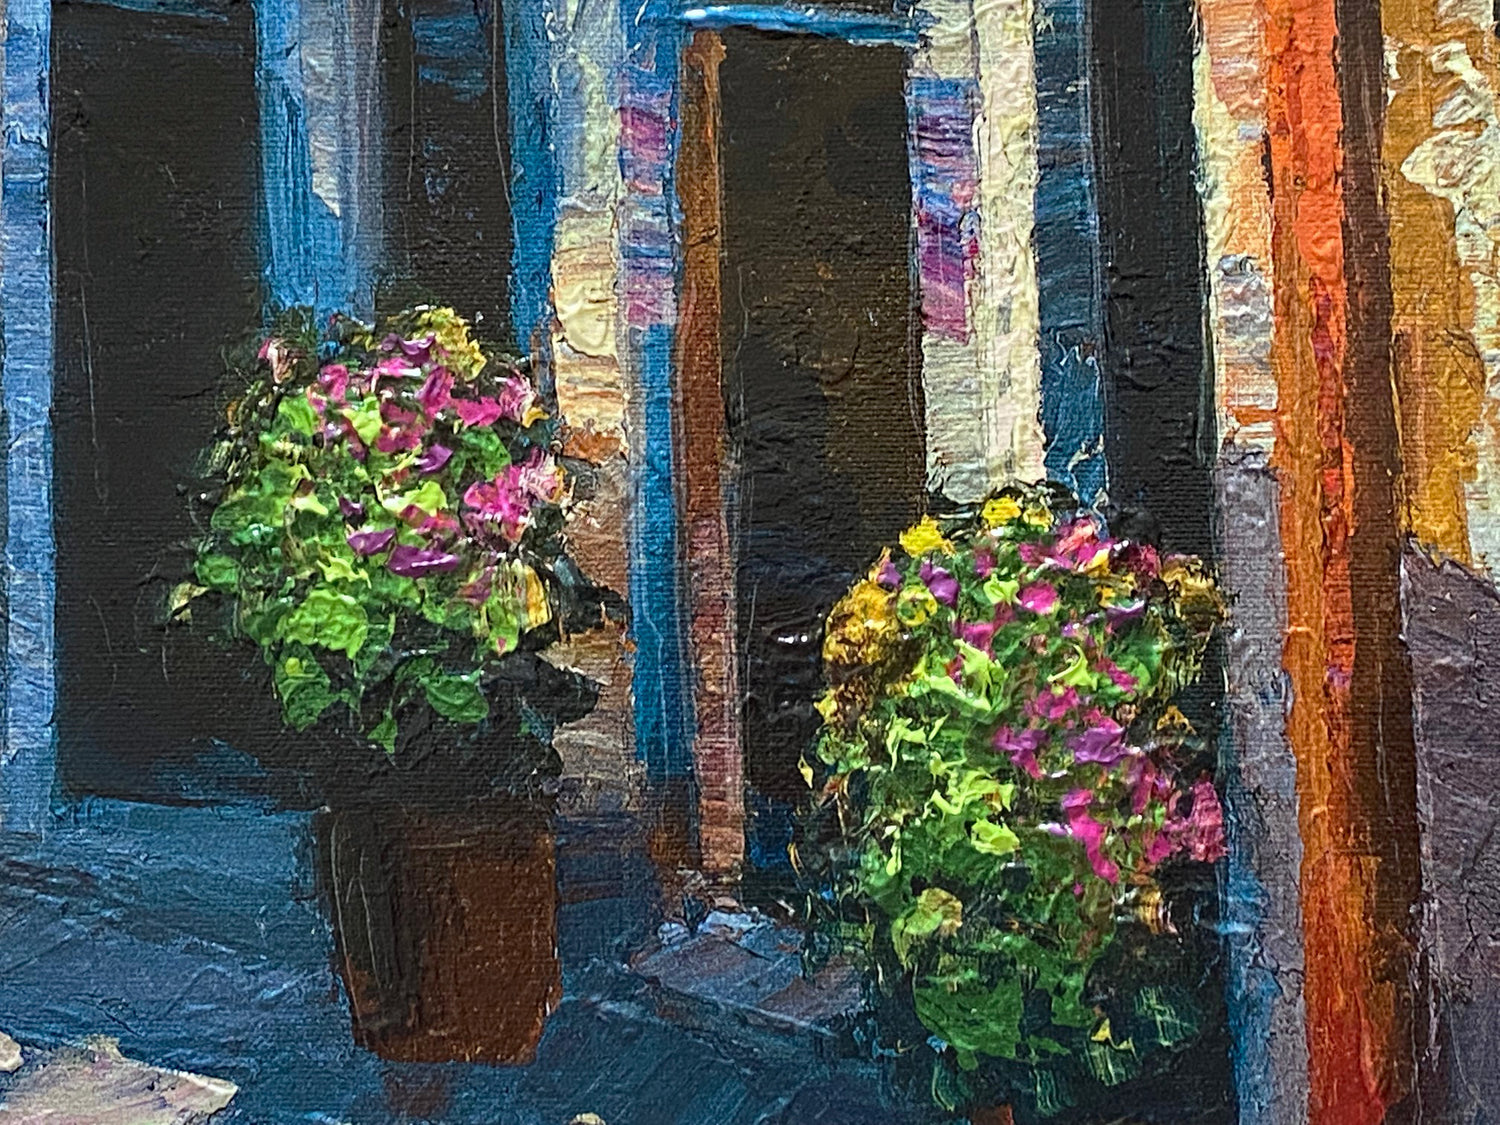 Village Hideaway Howard Behrens Textured Giclée on Board Hand Embellished Numbered with Artist Authorized Signature